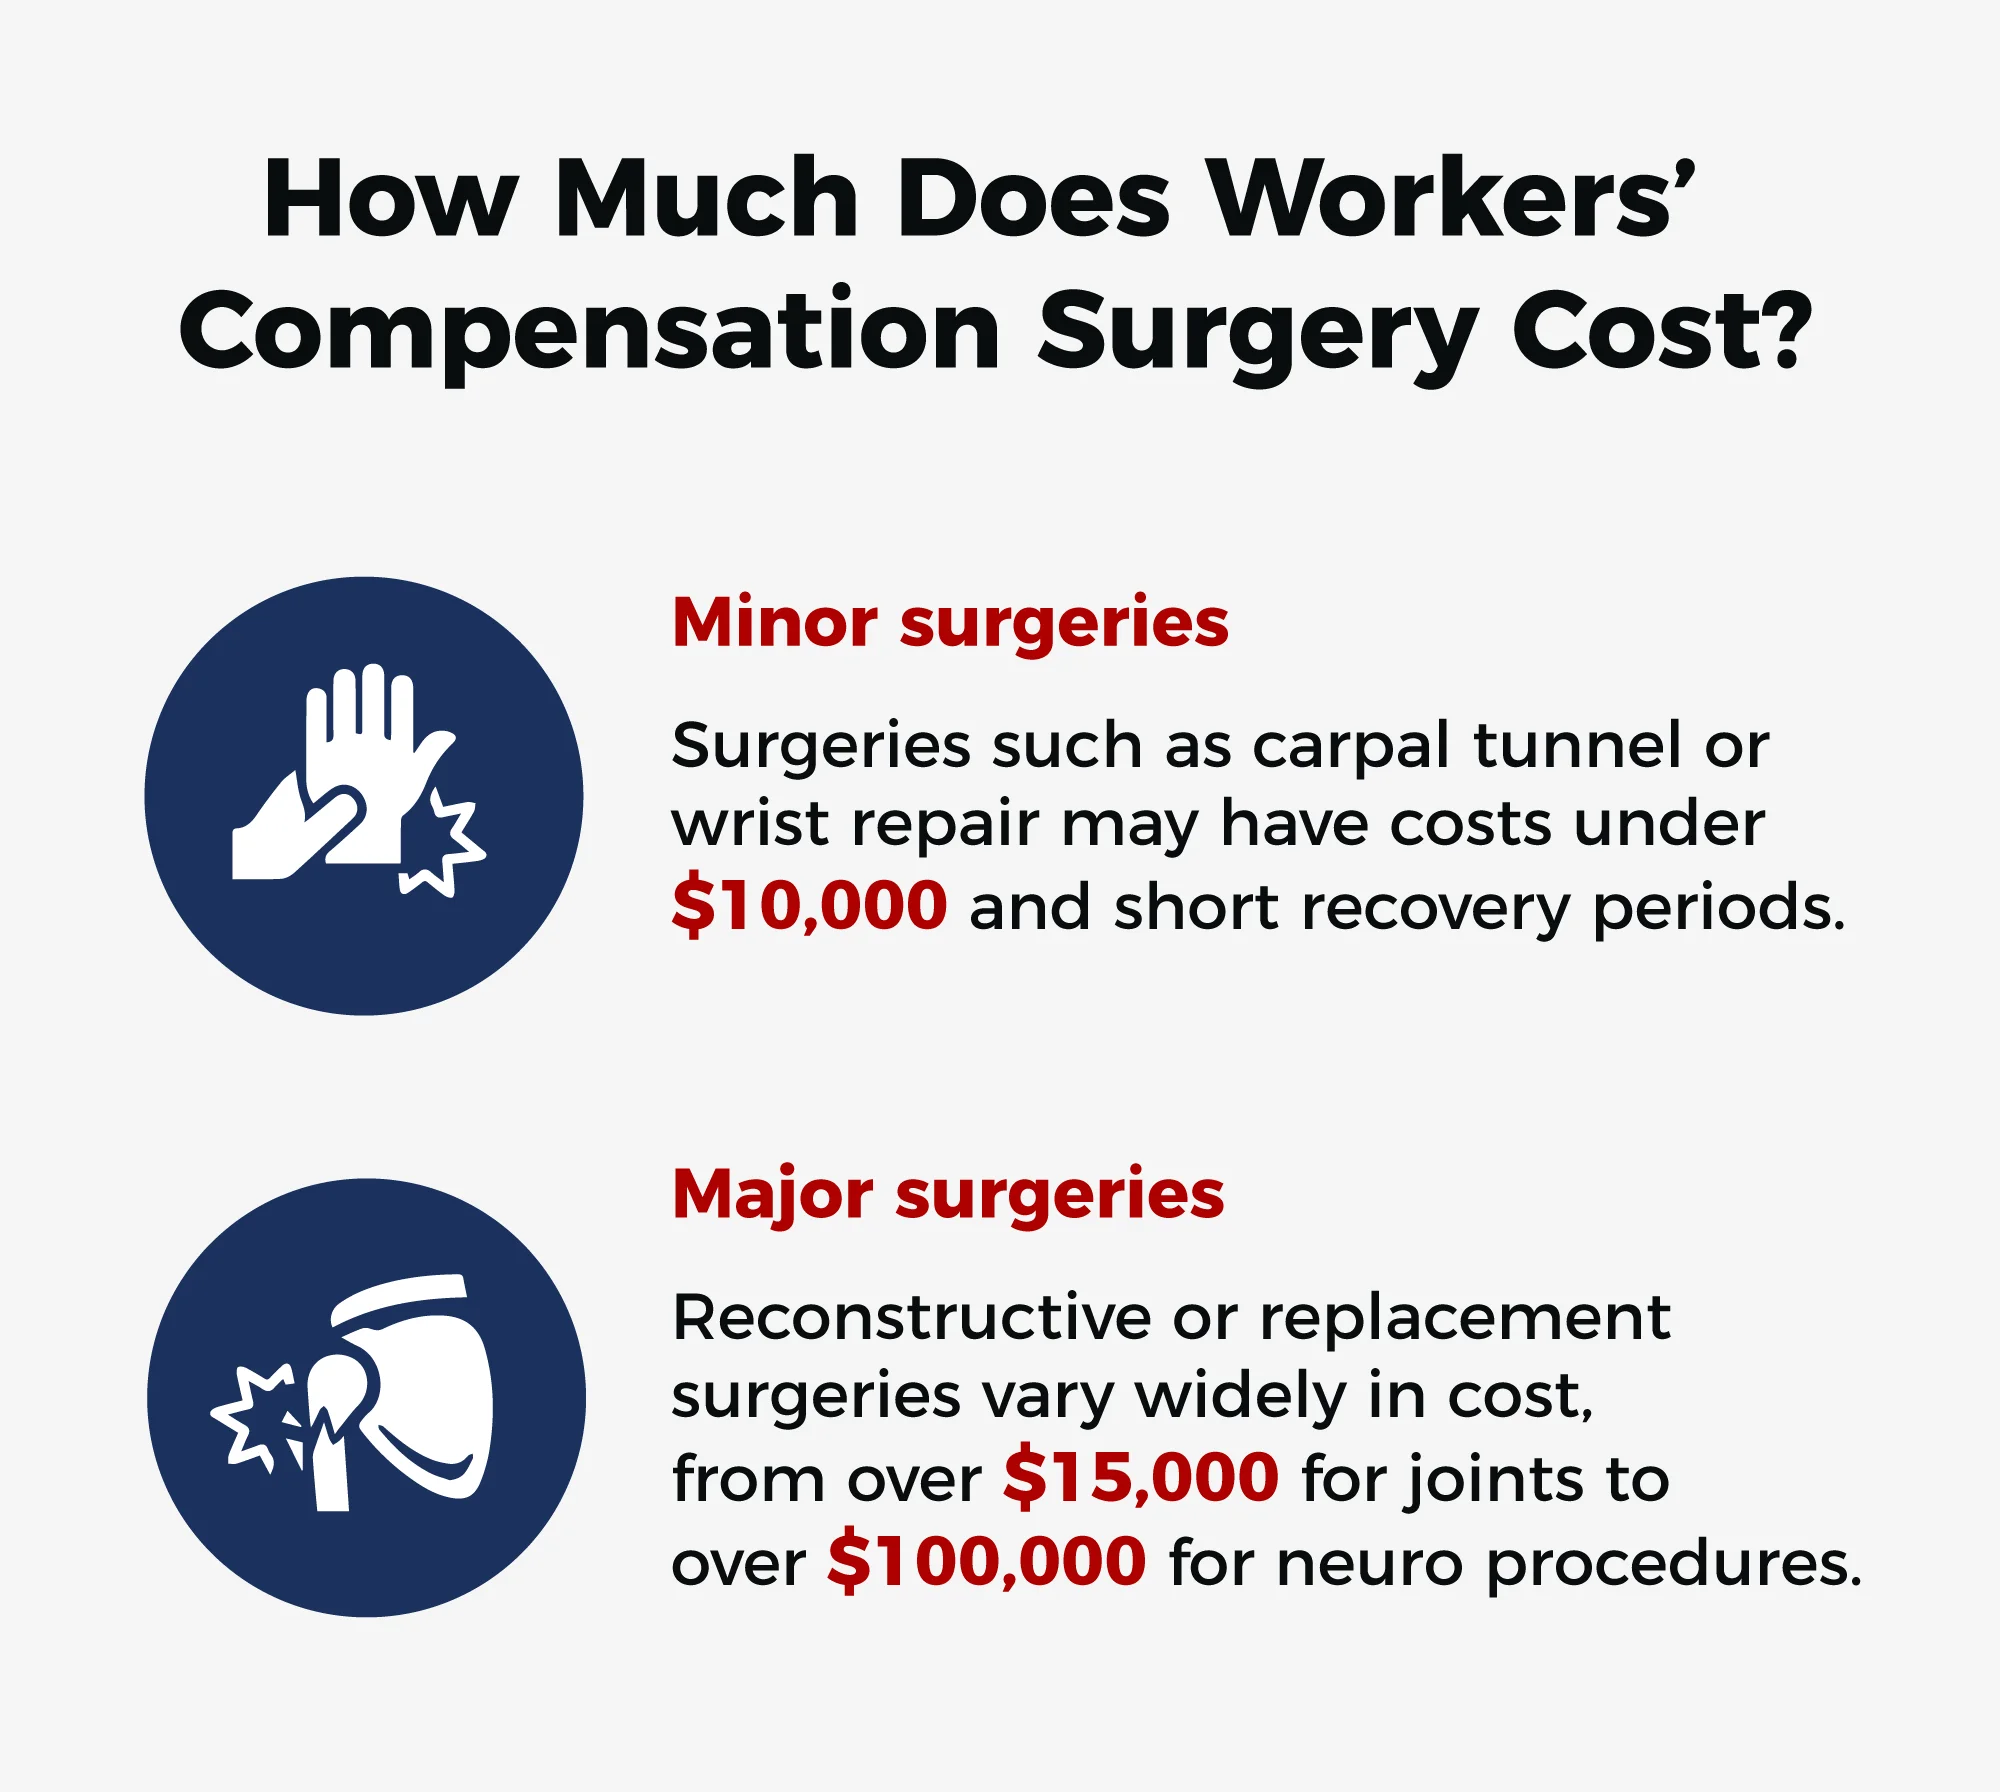 how much does workers' compensation surgery cost?